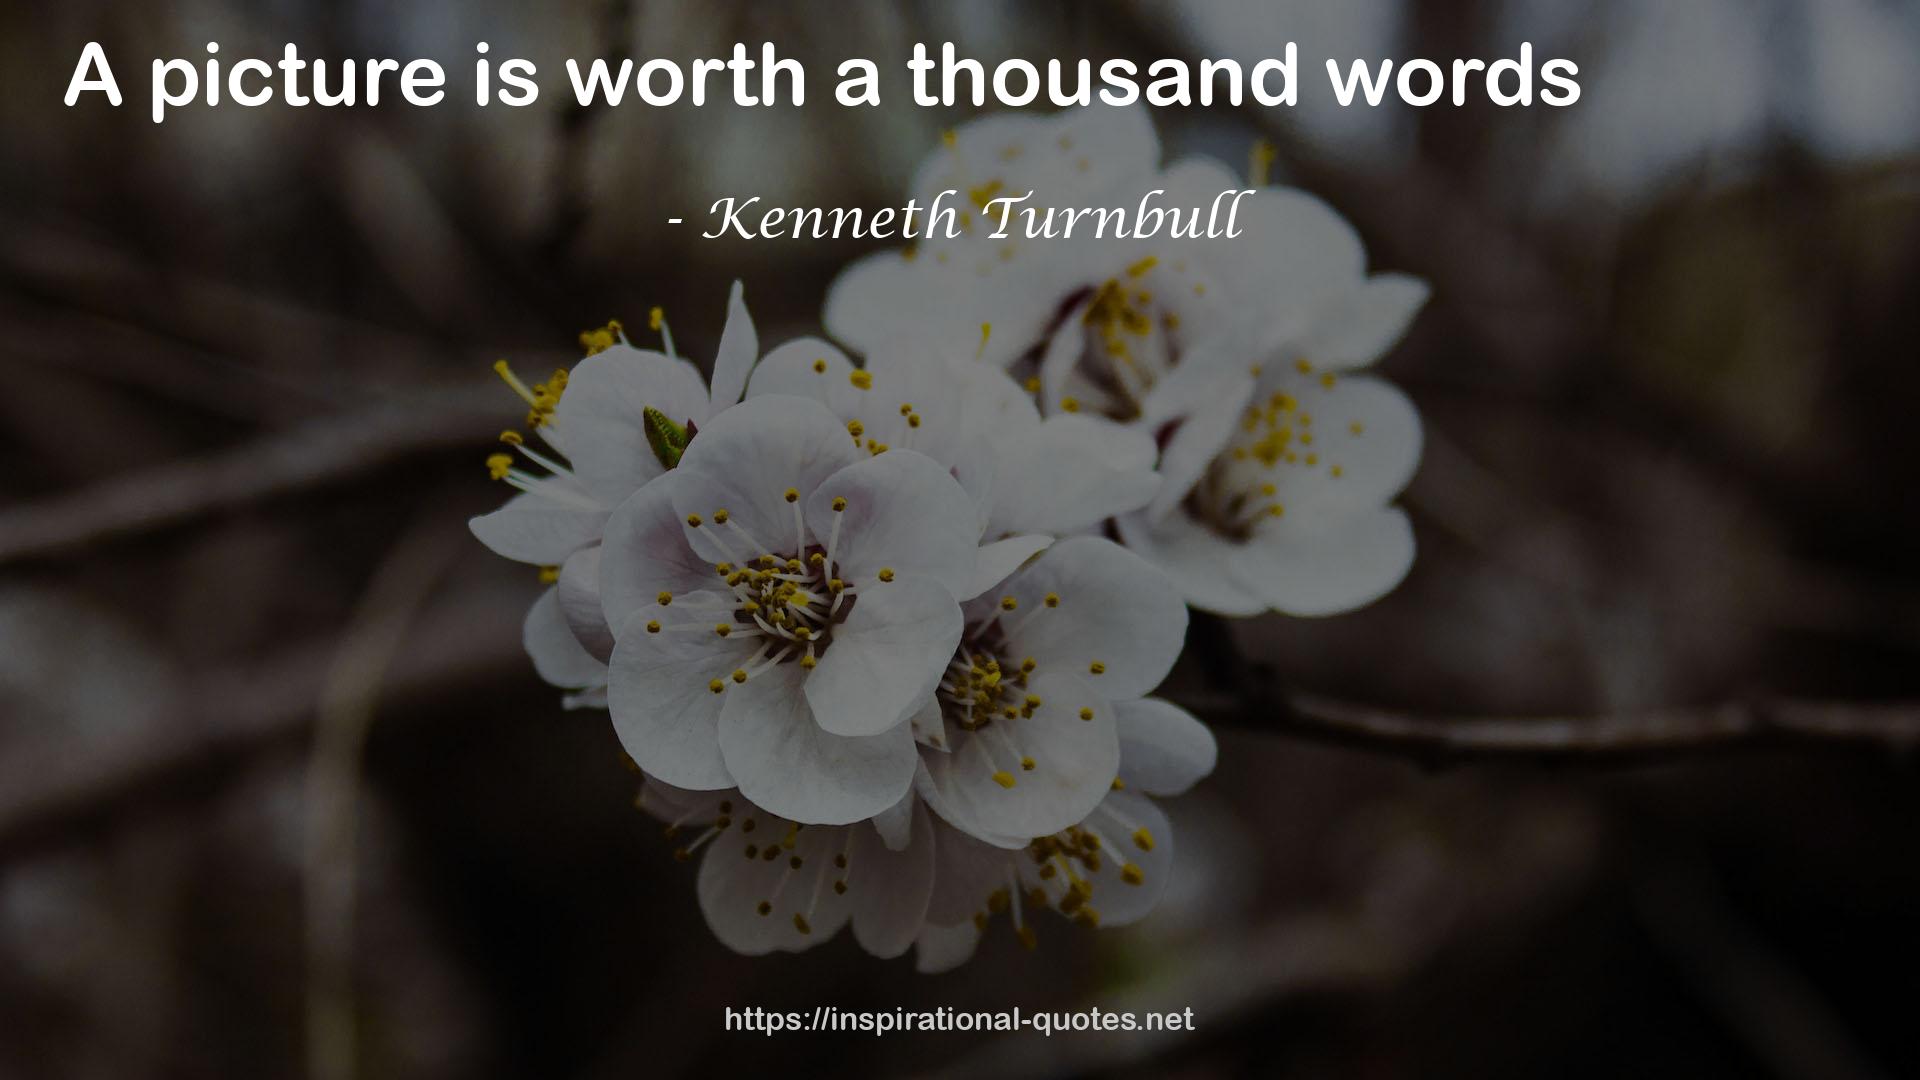 Kenneth Turnbull QUOTES